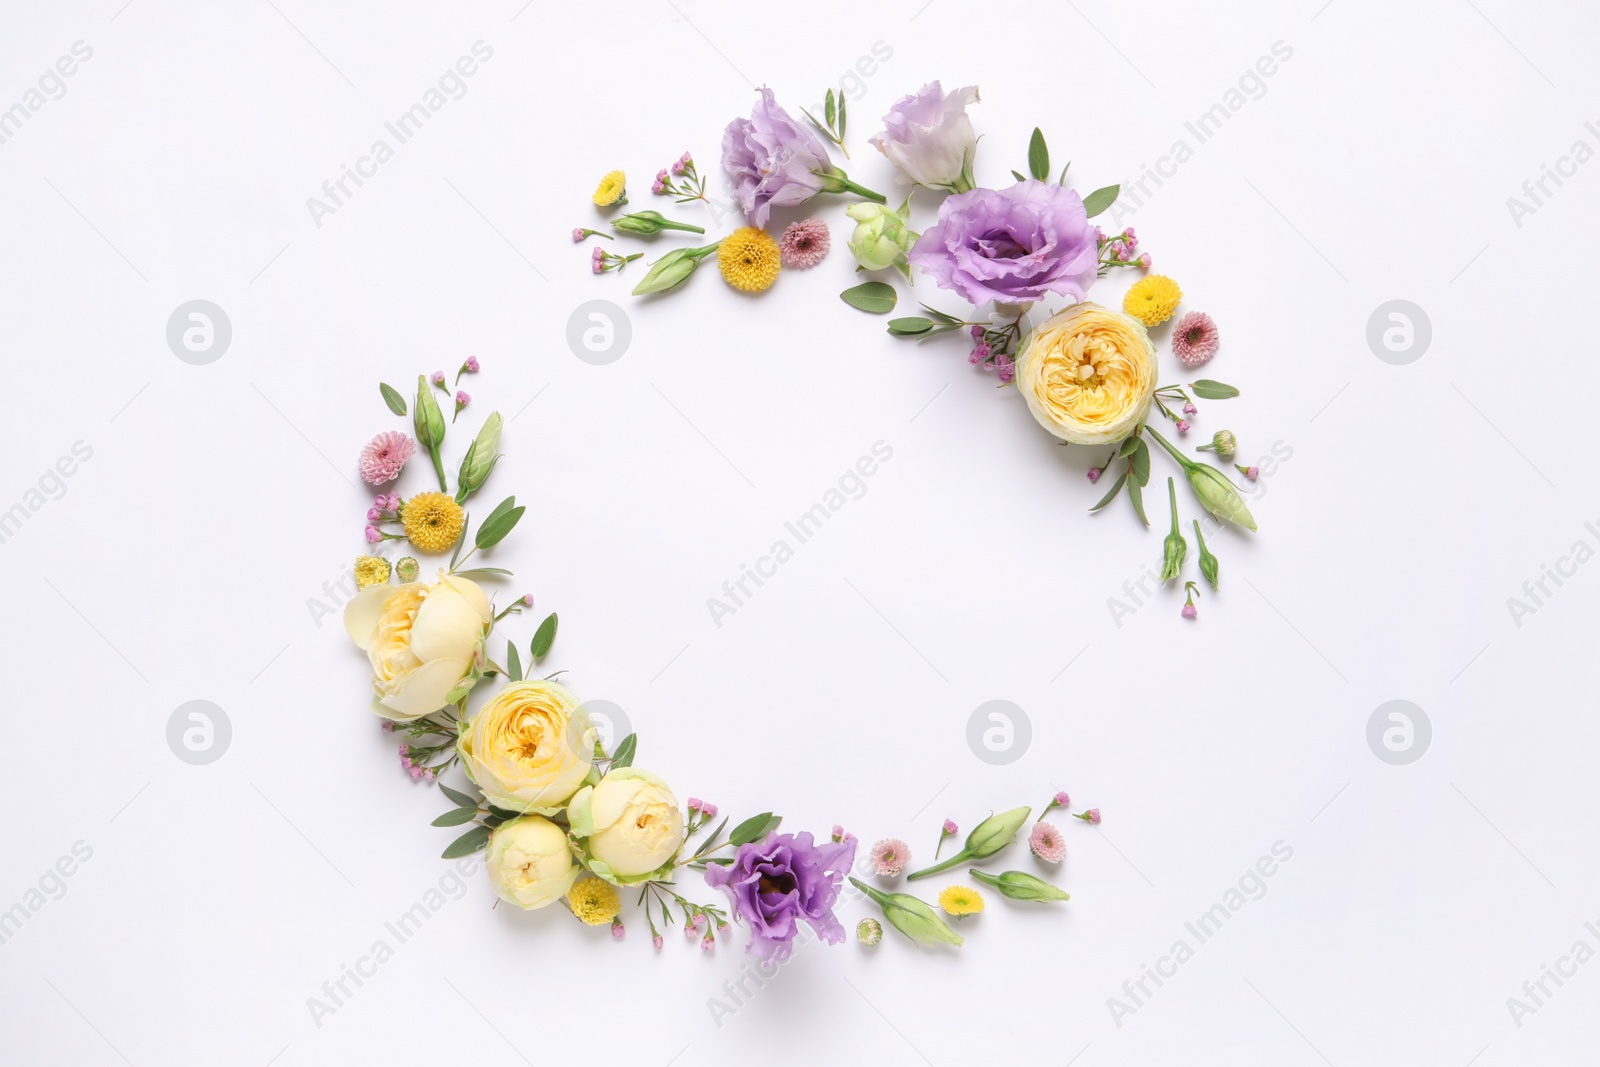 Photo of Wreath made of beautiful flowers and green leaves on white background, flat lay. Space for text